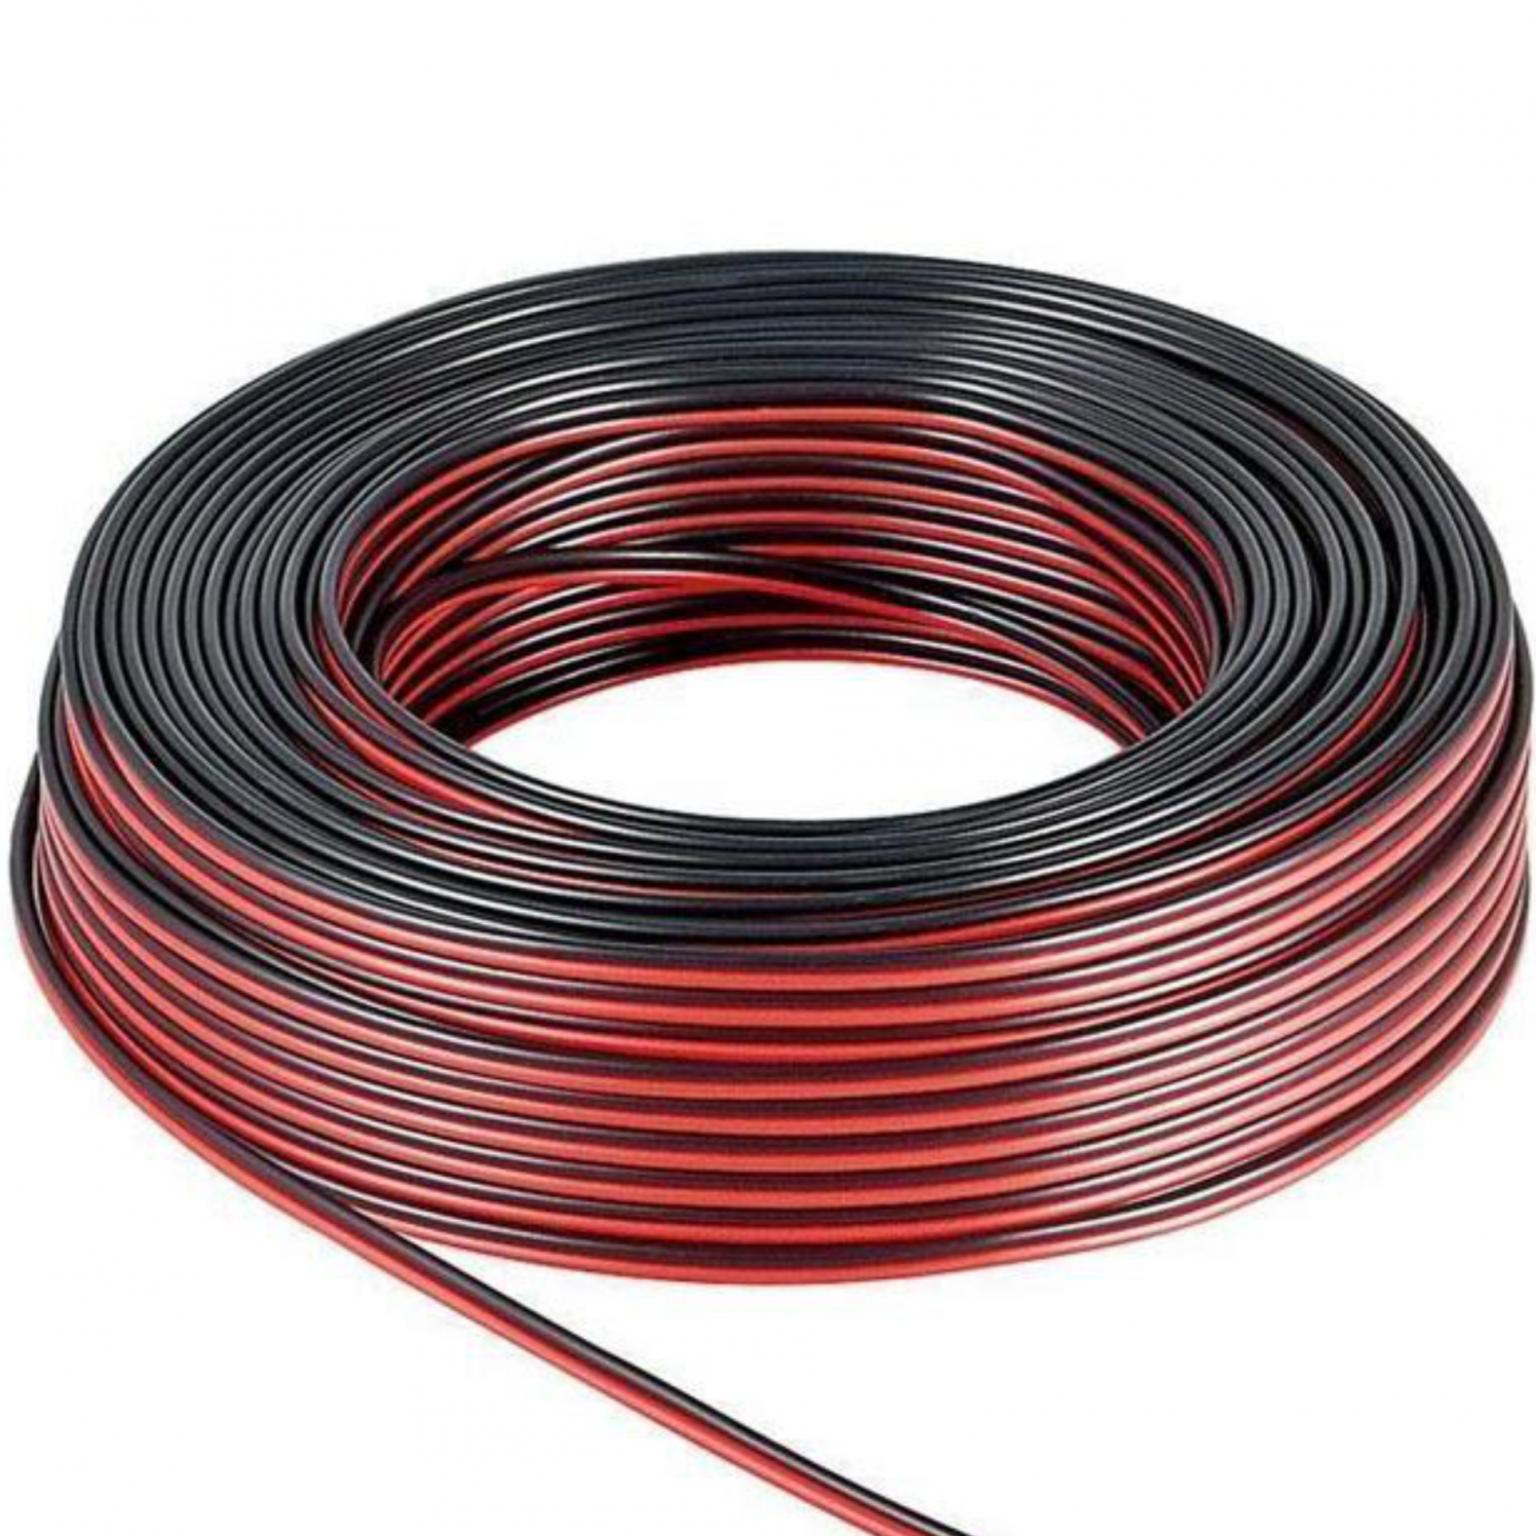 Image of Speaker cable red/black CCA 25 m roll, cable diameter 2 x 4,0 mm? - Go